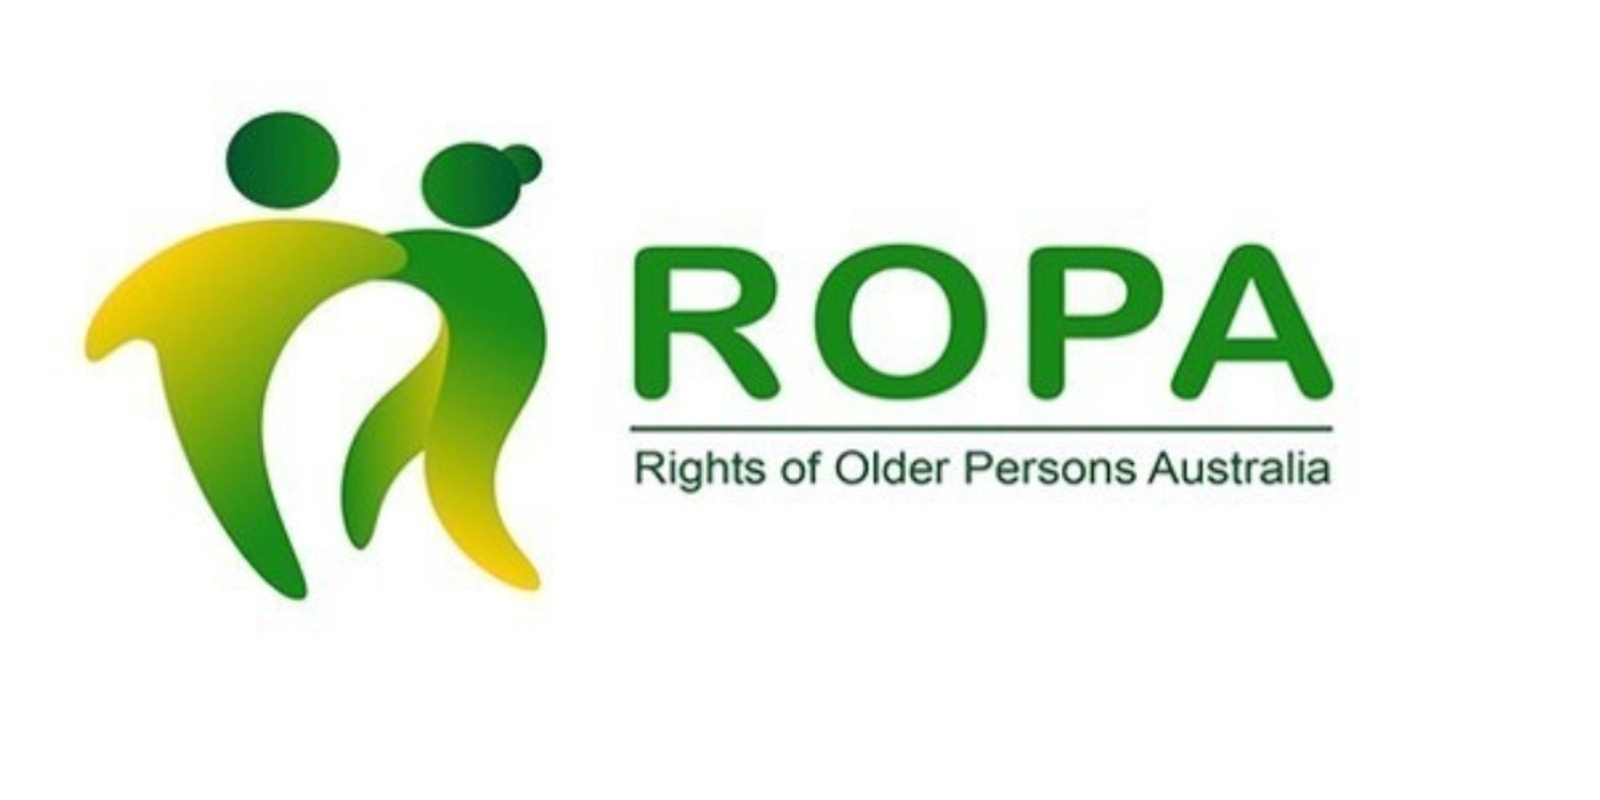 Roundtable|Building Momentum and Moving the Australian Government to Support UN Convention on the Human Rights of Older Persons.